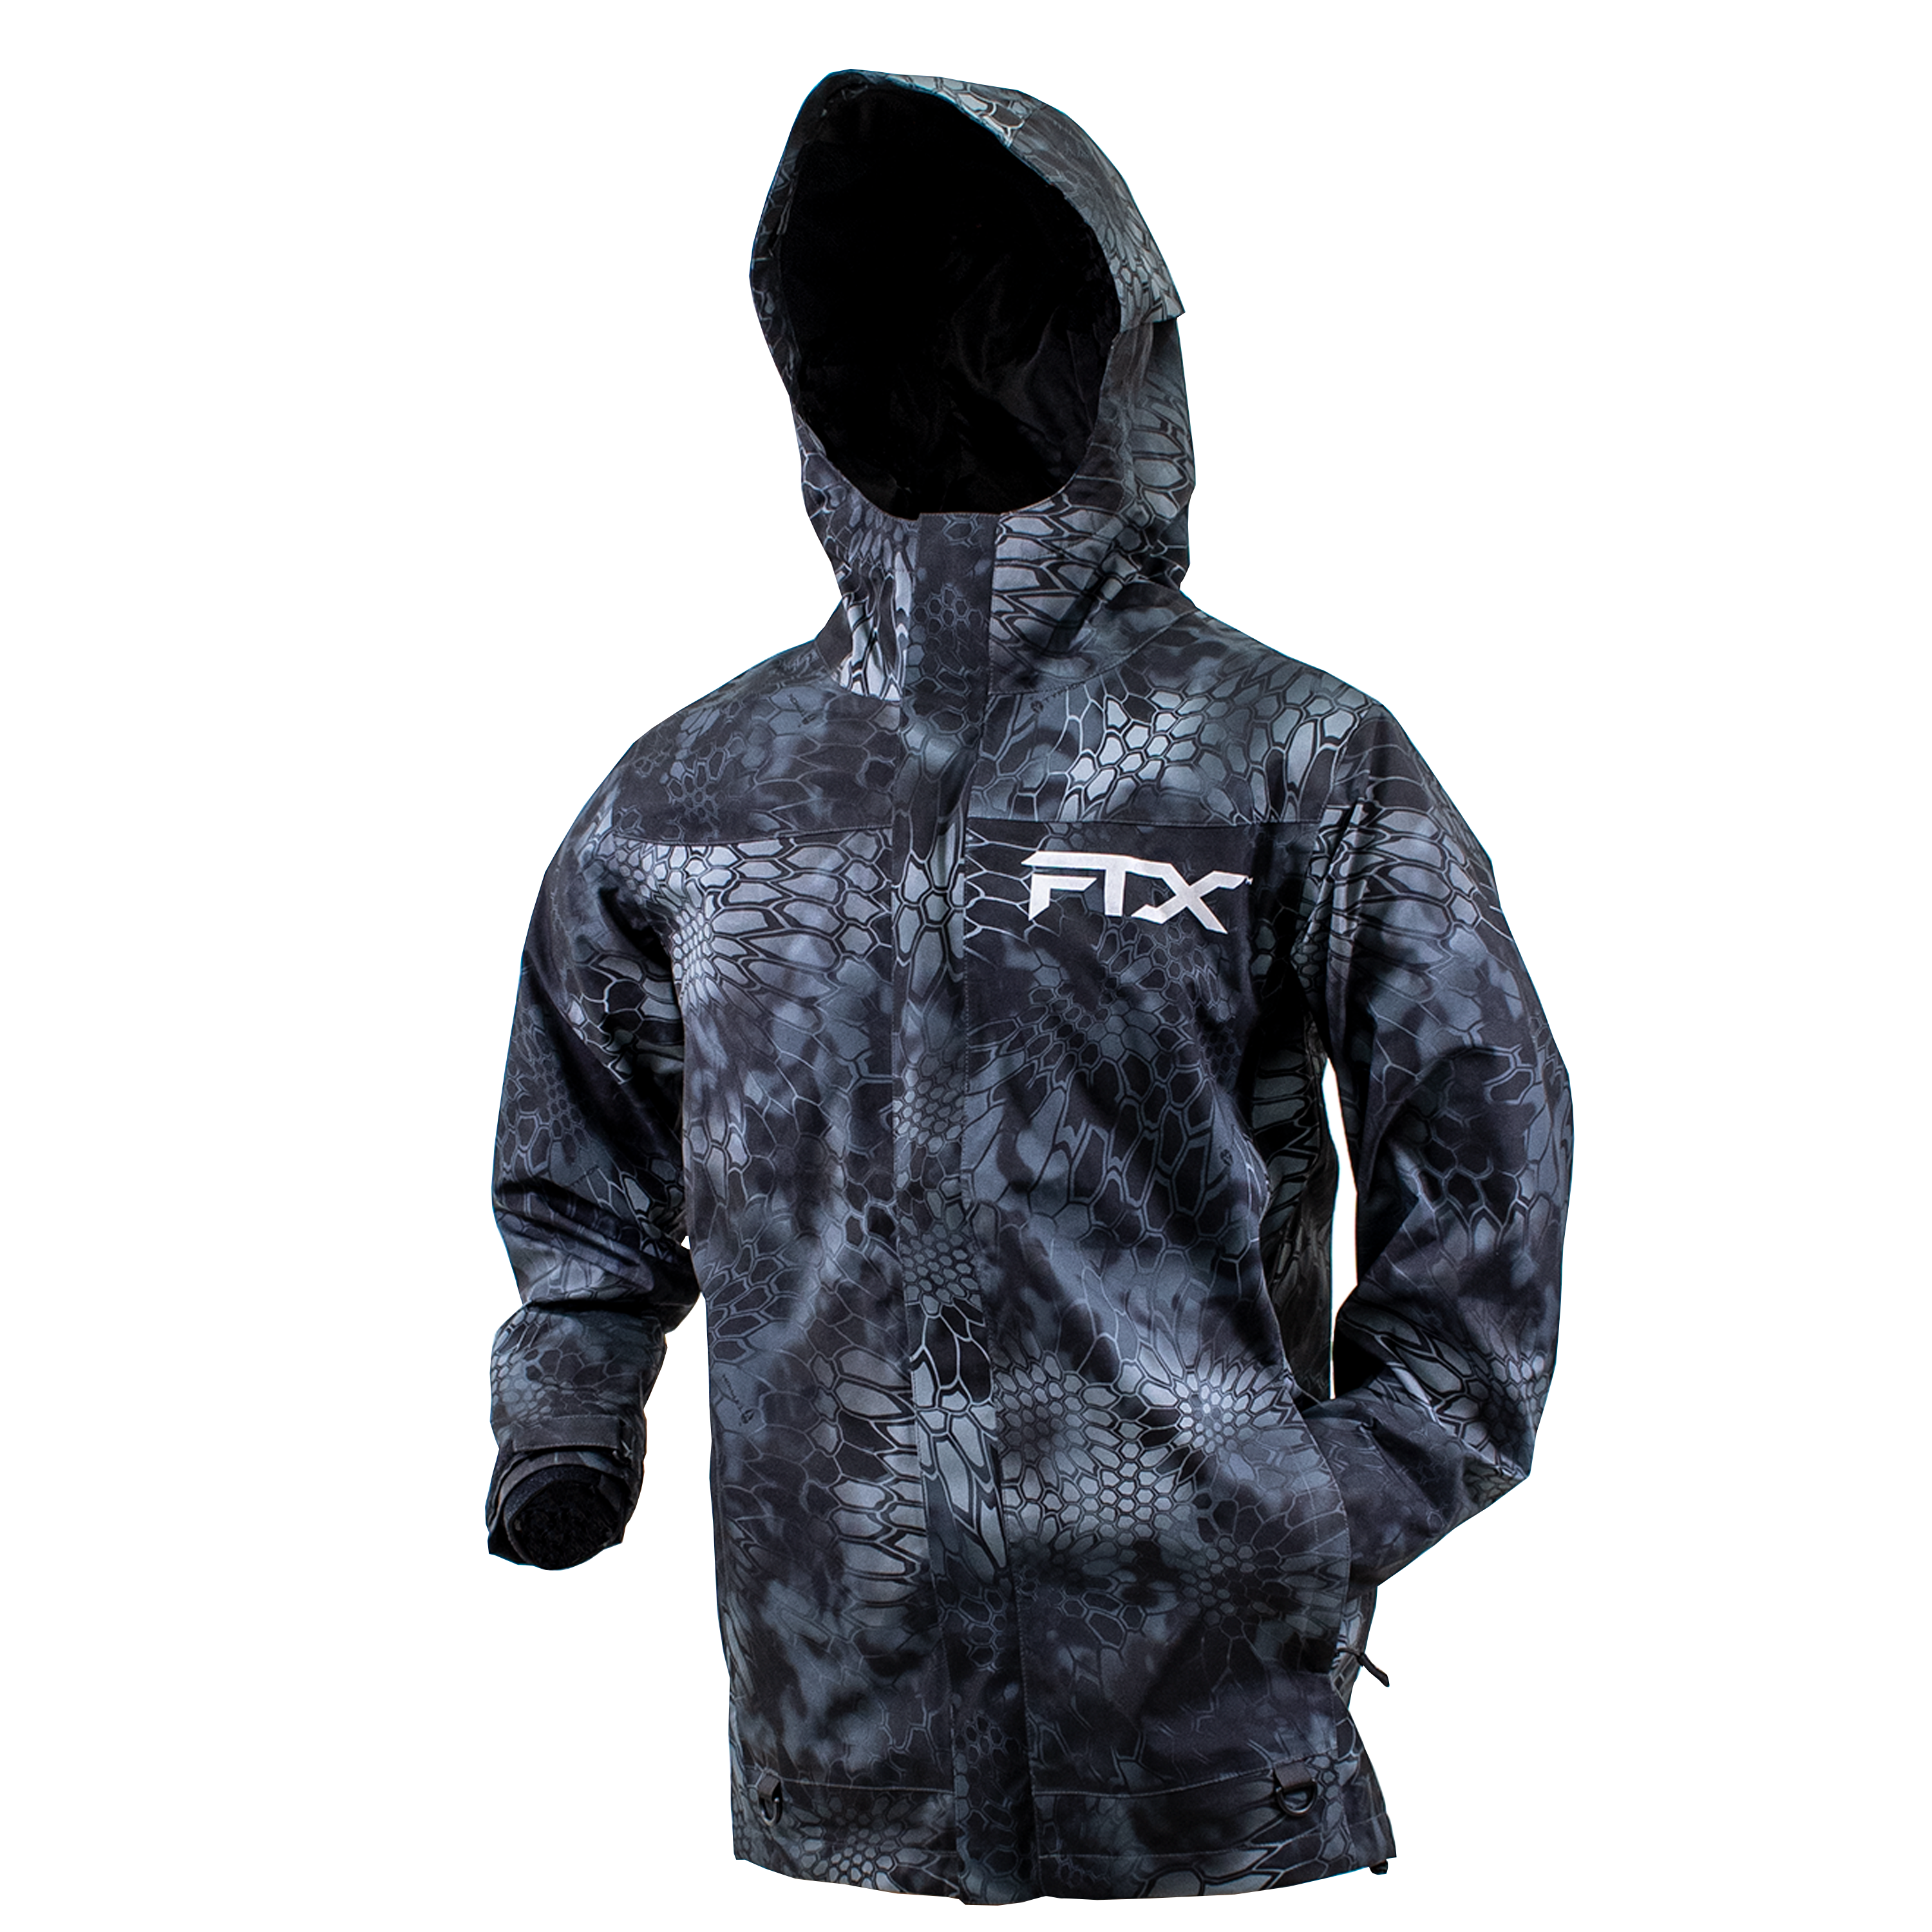 Our FTX armor series in Ocean Blue. Discounted now and ready for your  Spring fishing!